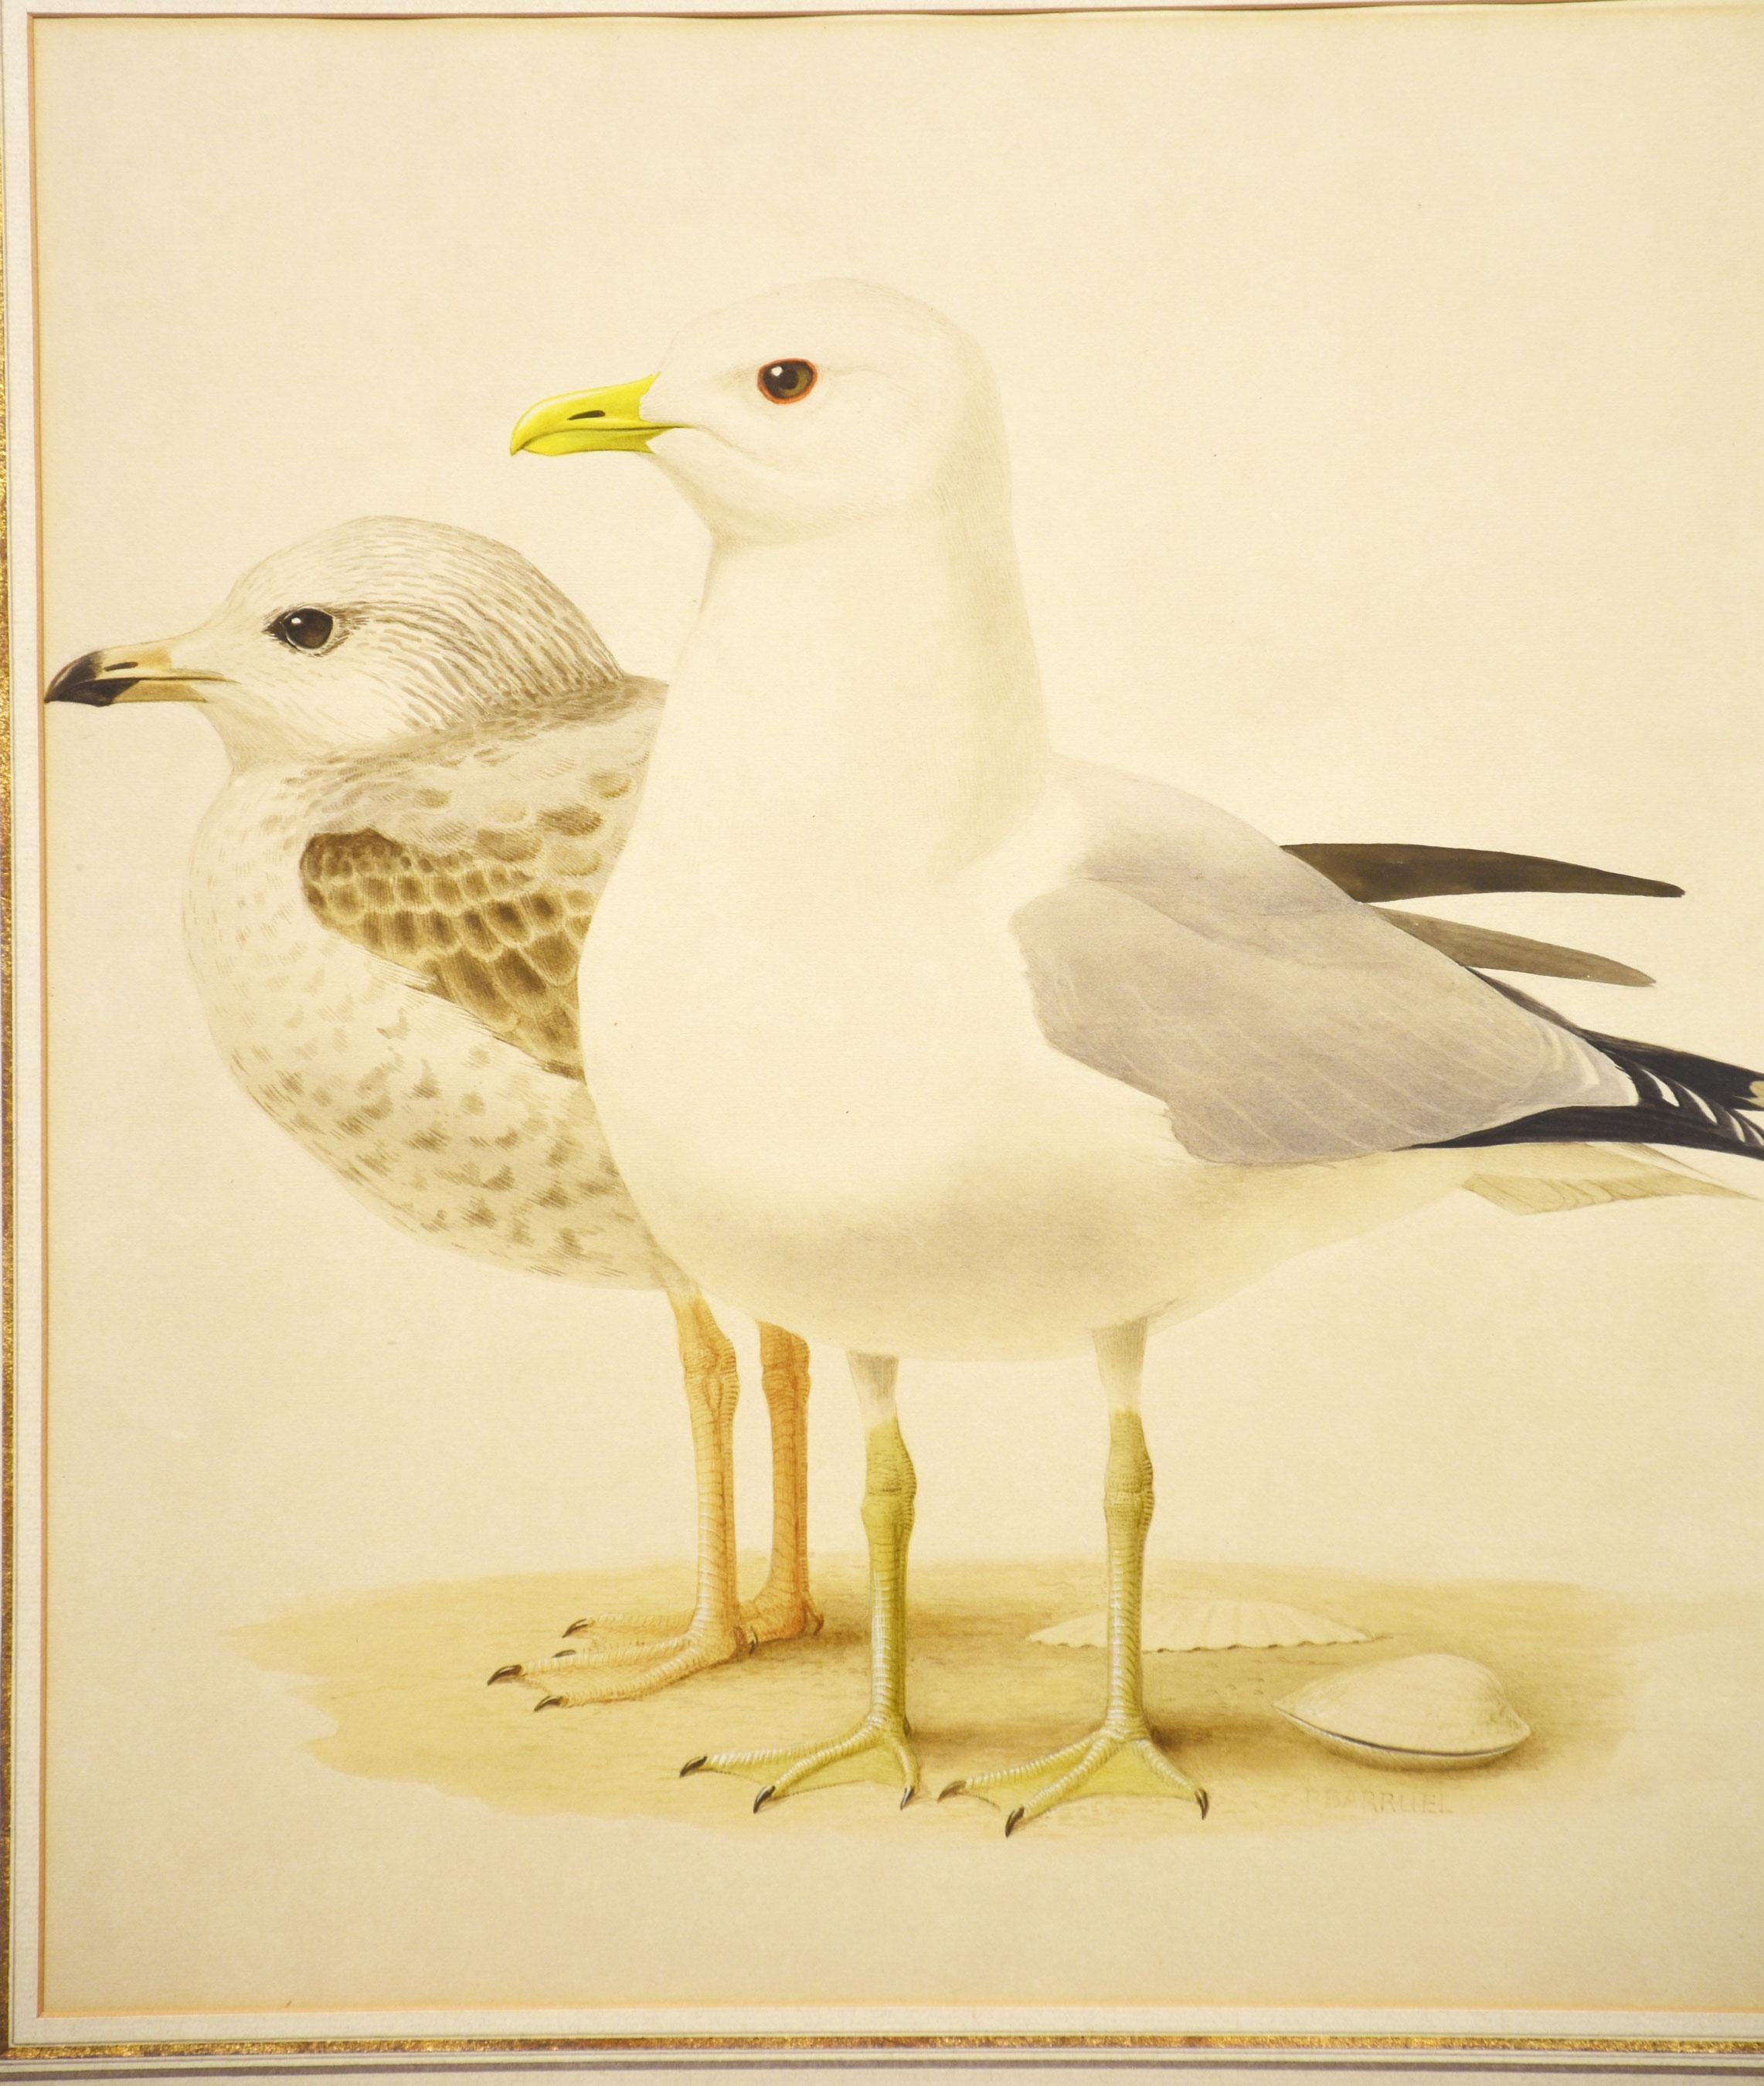 Watercolour on paper of a Seagull Signed Paul-Louis Barruel encased in ebonies frame.
Dimensions
Height 27 Inches
Width 22 Inches
Depth 1.5 Inches.